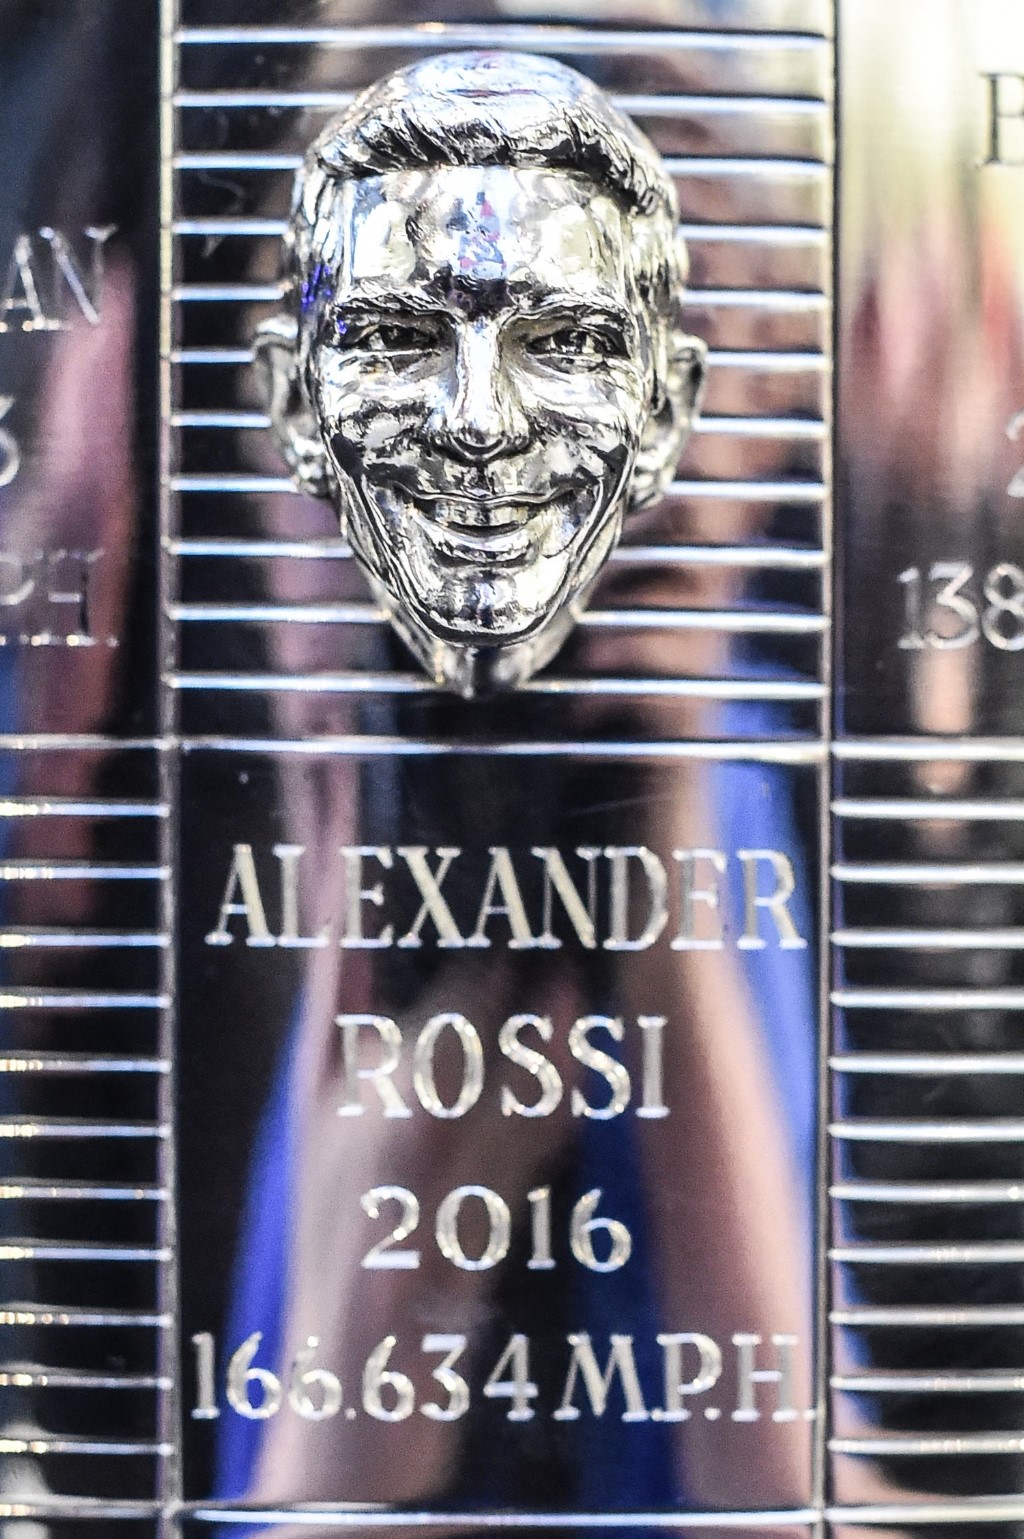 Rossi's place on the trophy